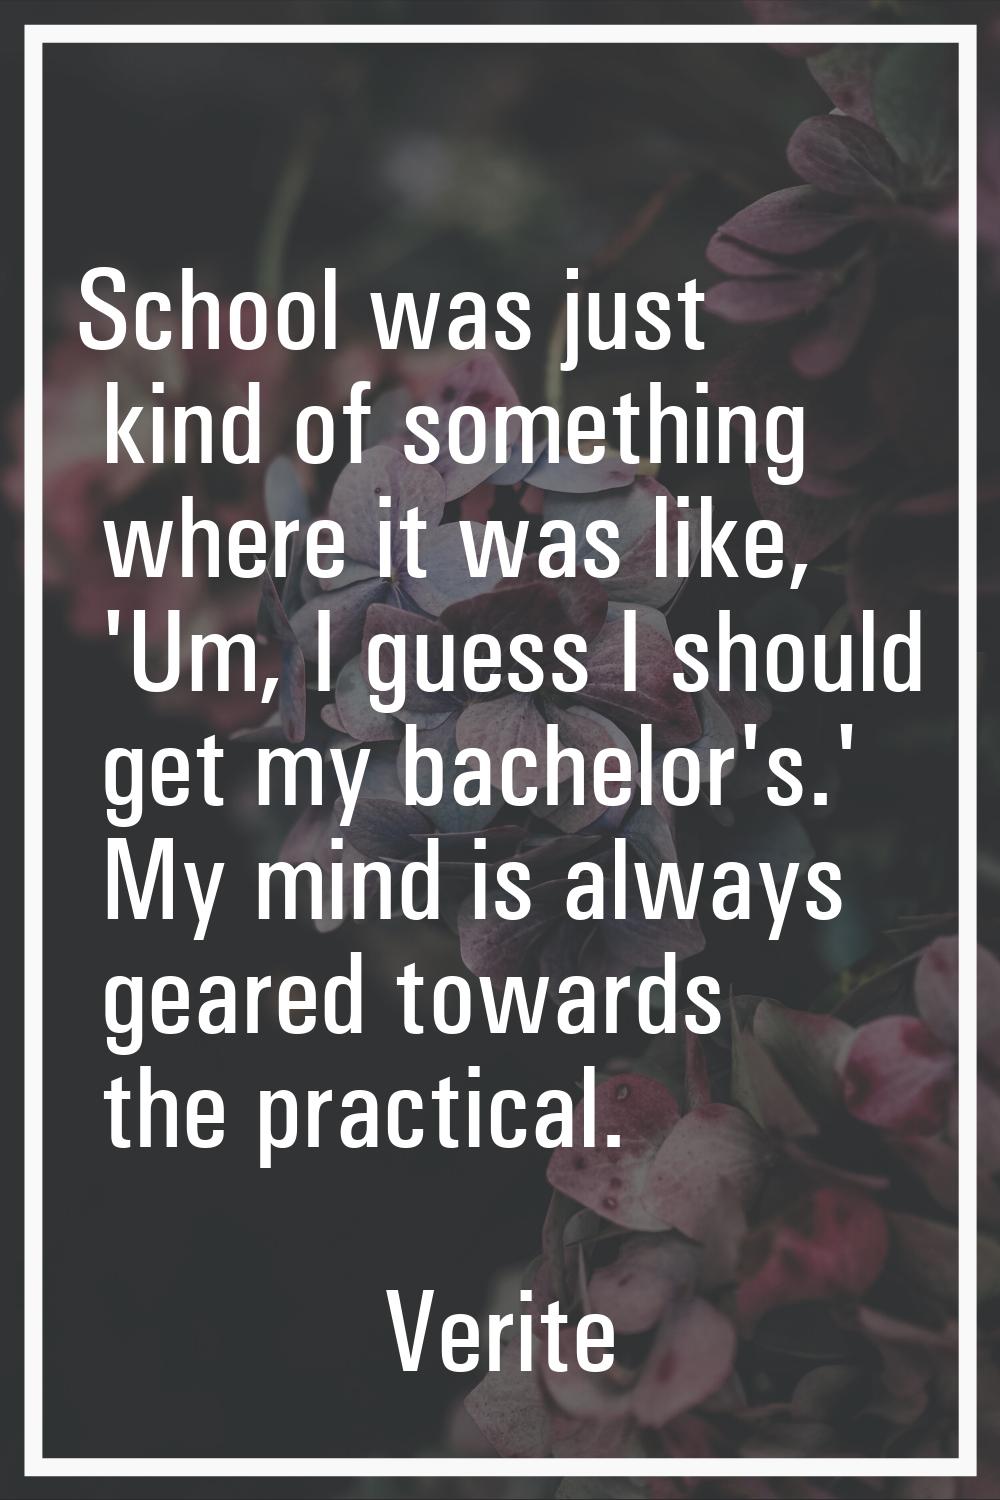 School was just kind of something where it was like, 'Um, I guess I should get my bachelor's.' My m